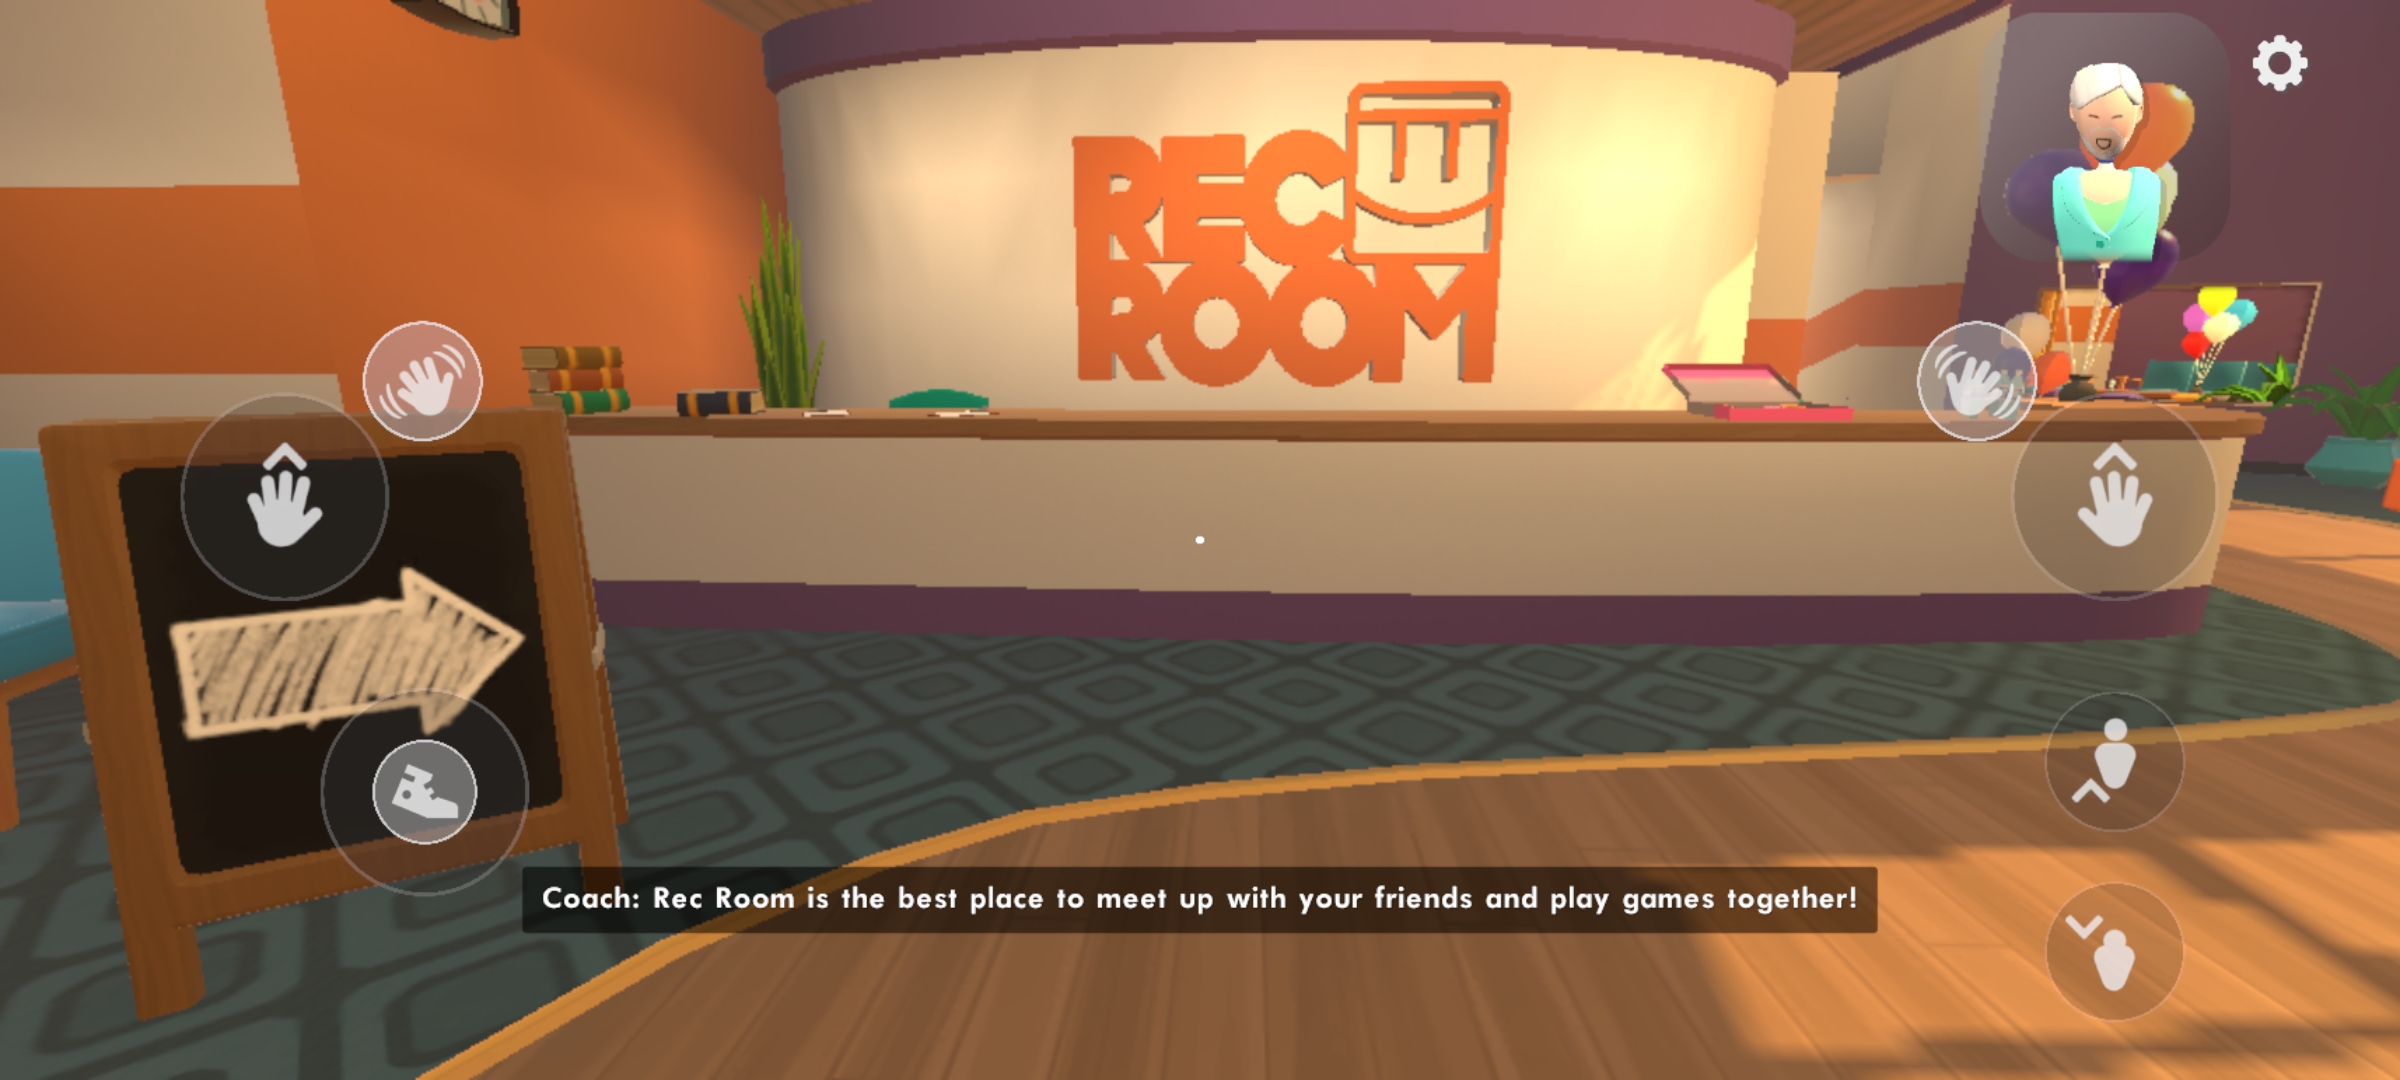 Banned from rec room